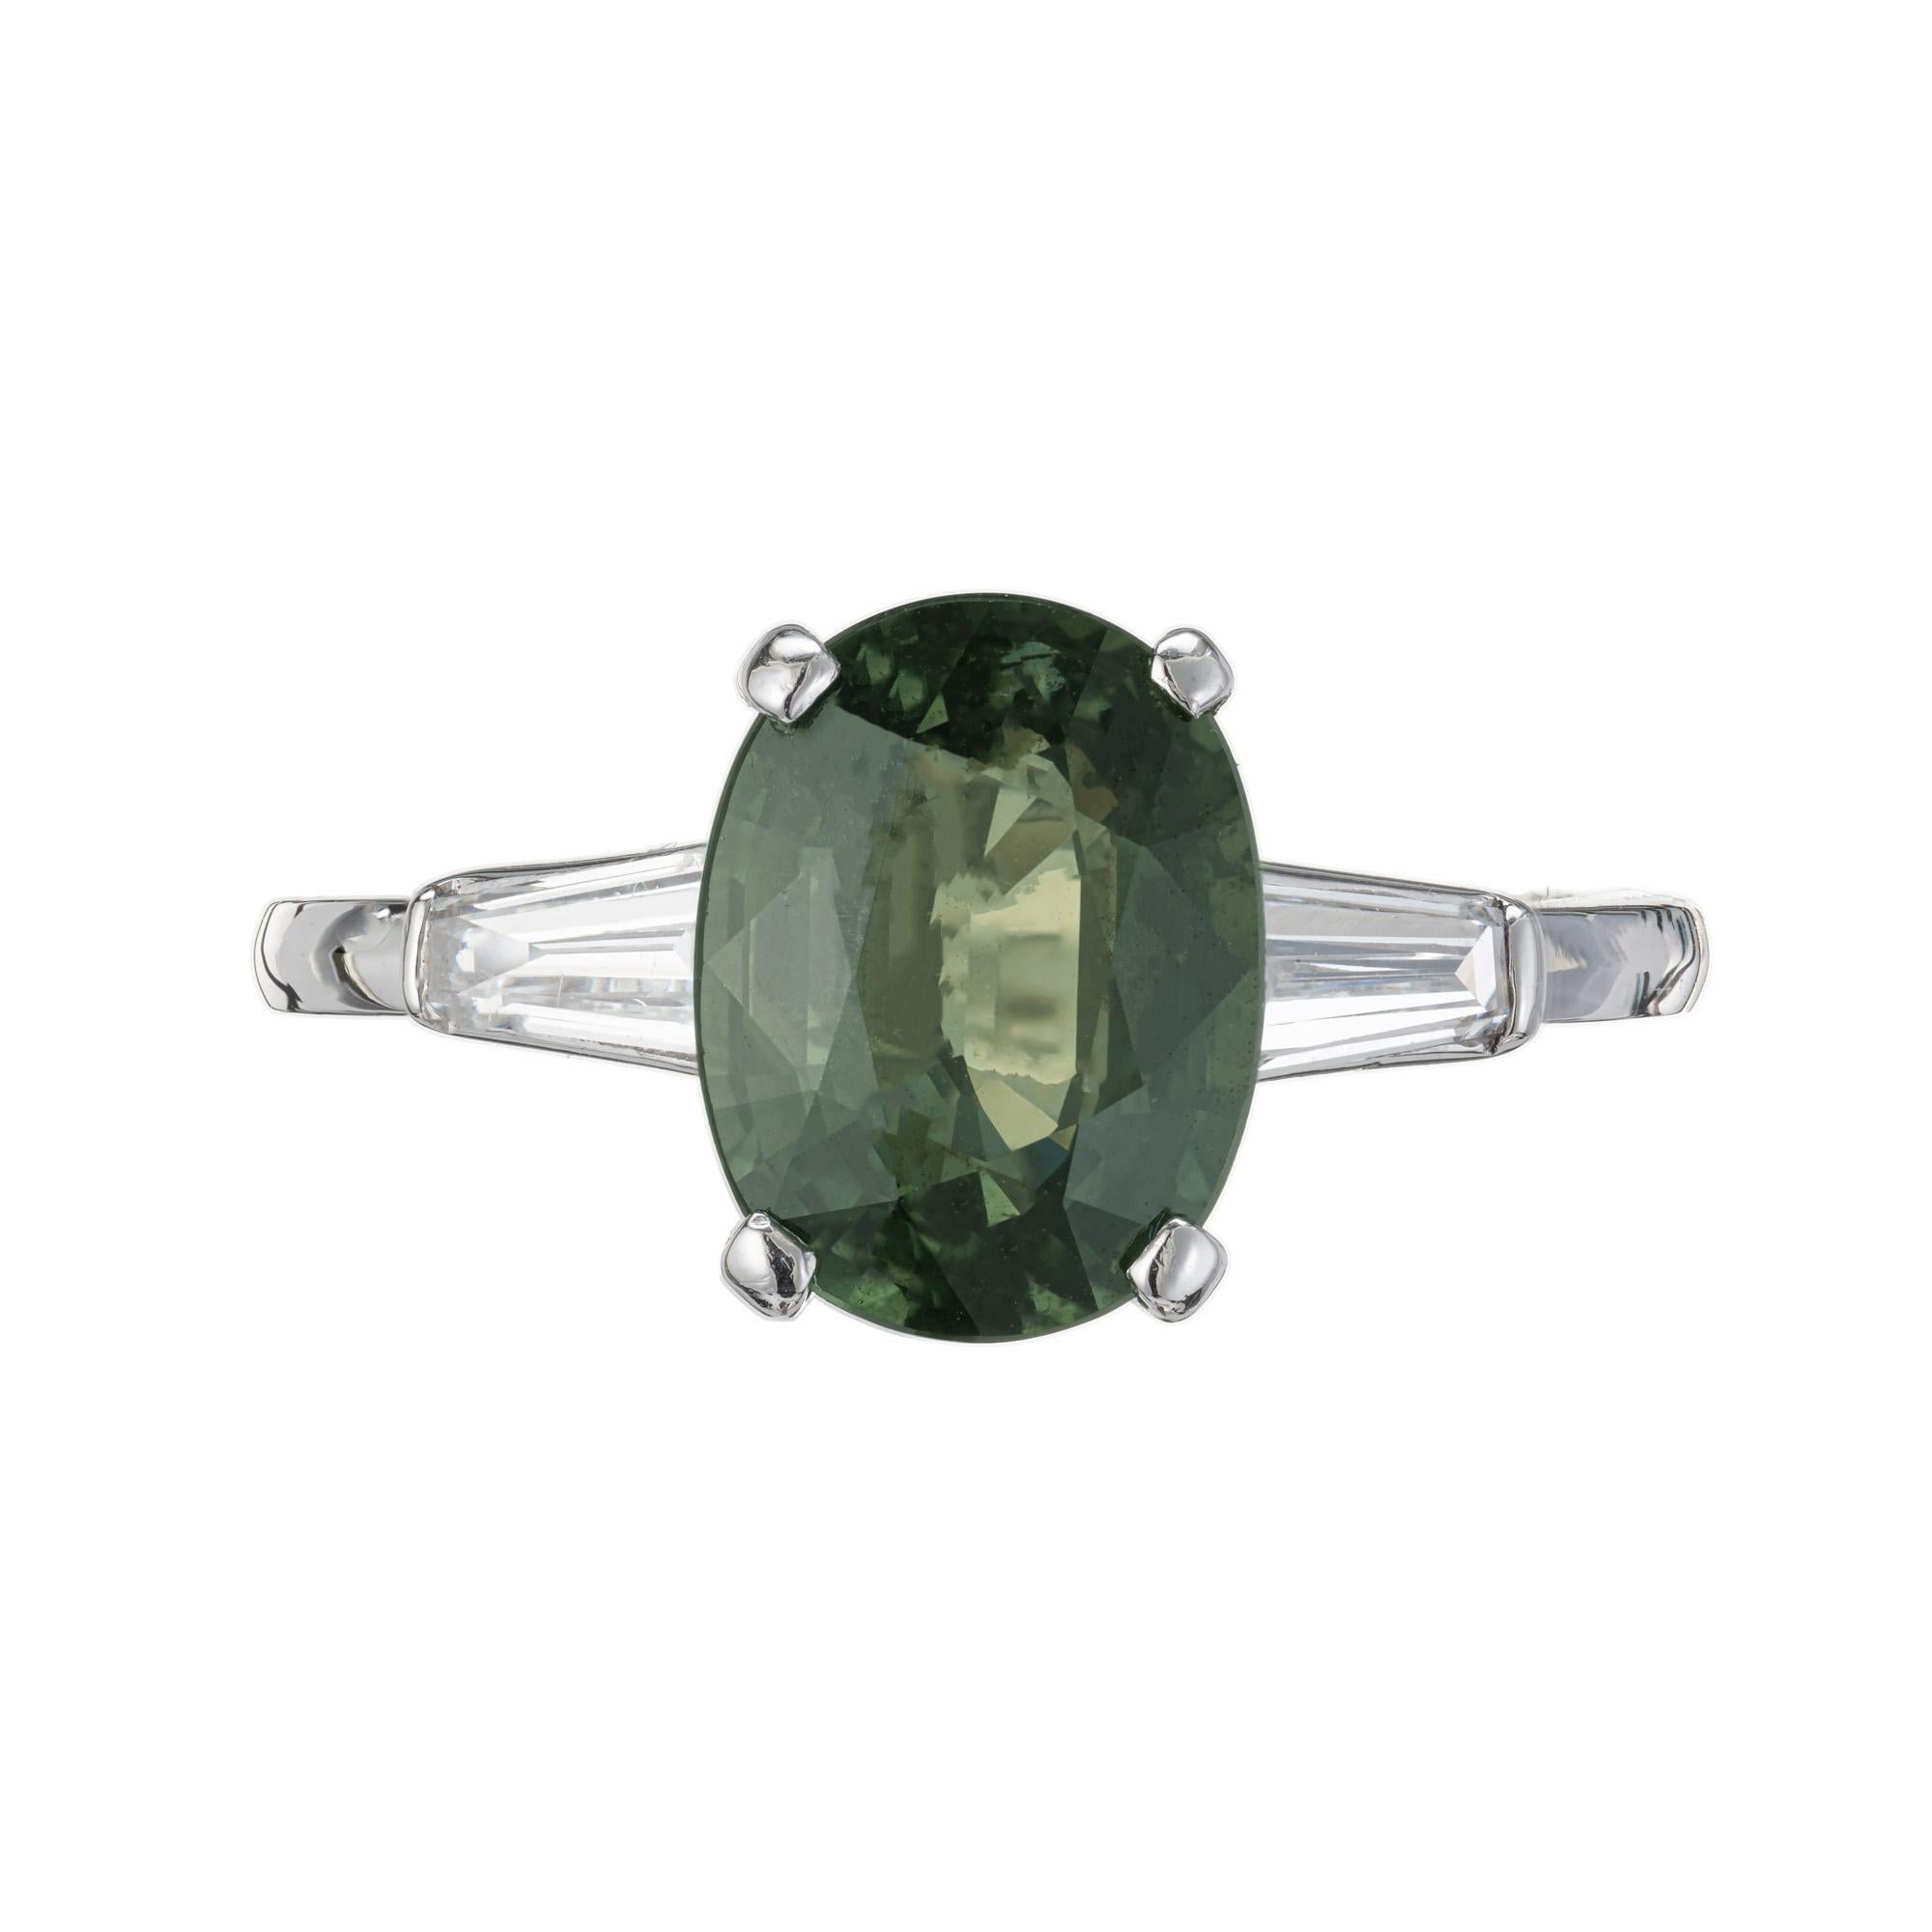 Art Deco 1930's, Sapphire and Diamond engagement ring. GIA certified oval, natural green sapphire set in a platinum three-stone setting with 2 tapered baguette side diamonds. This green sapphire is certified, no heat and no enhancements. The